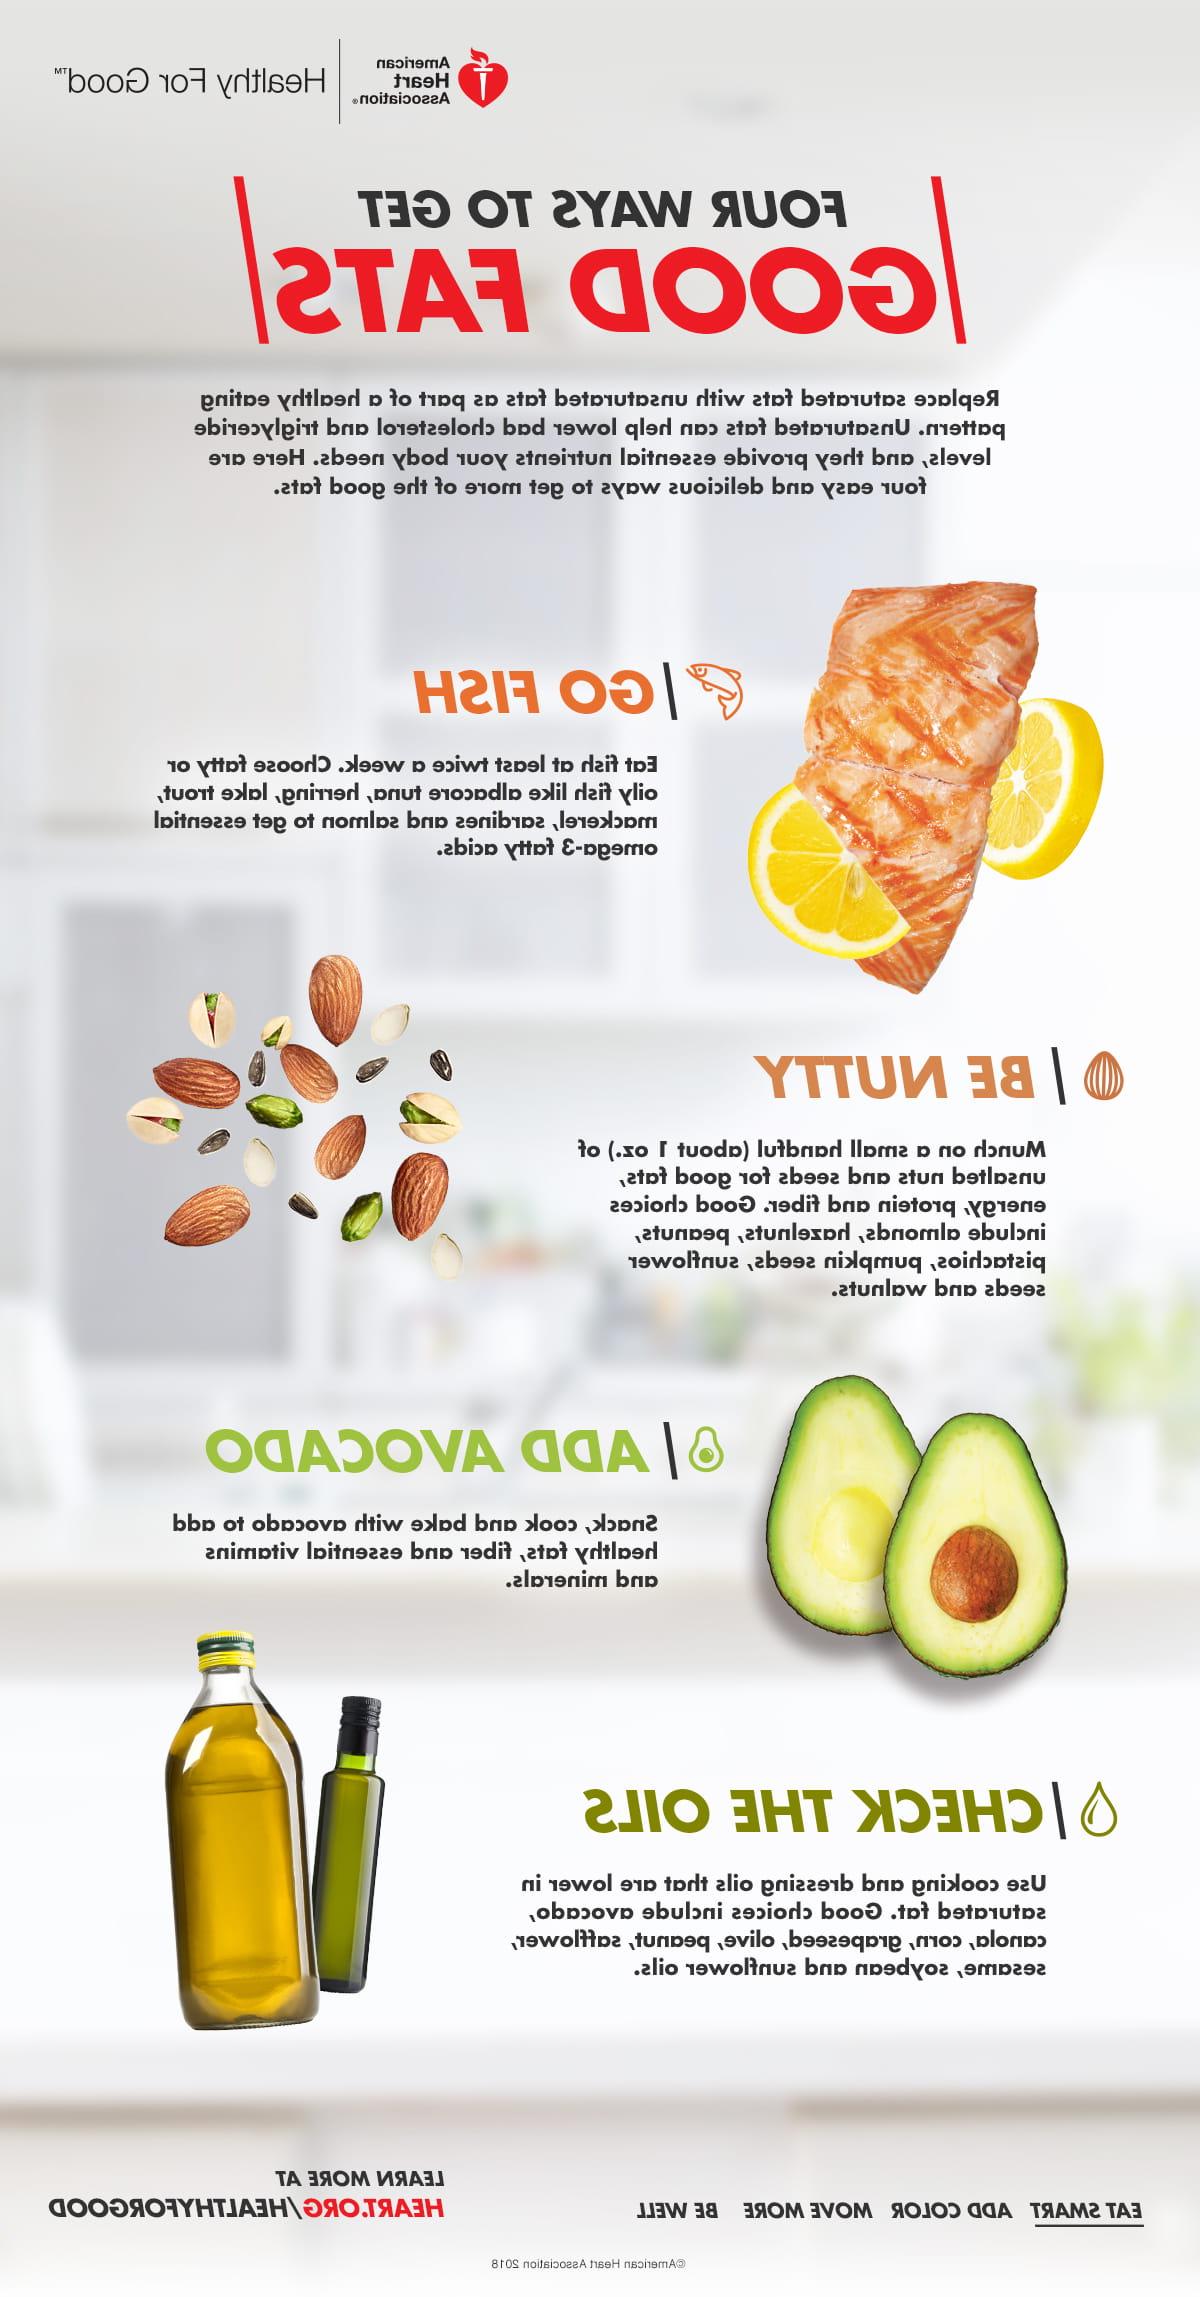 4 Ways to Get Good Fats Infographic